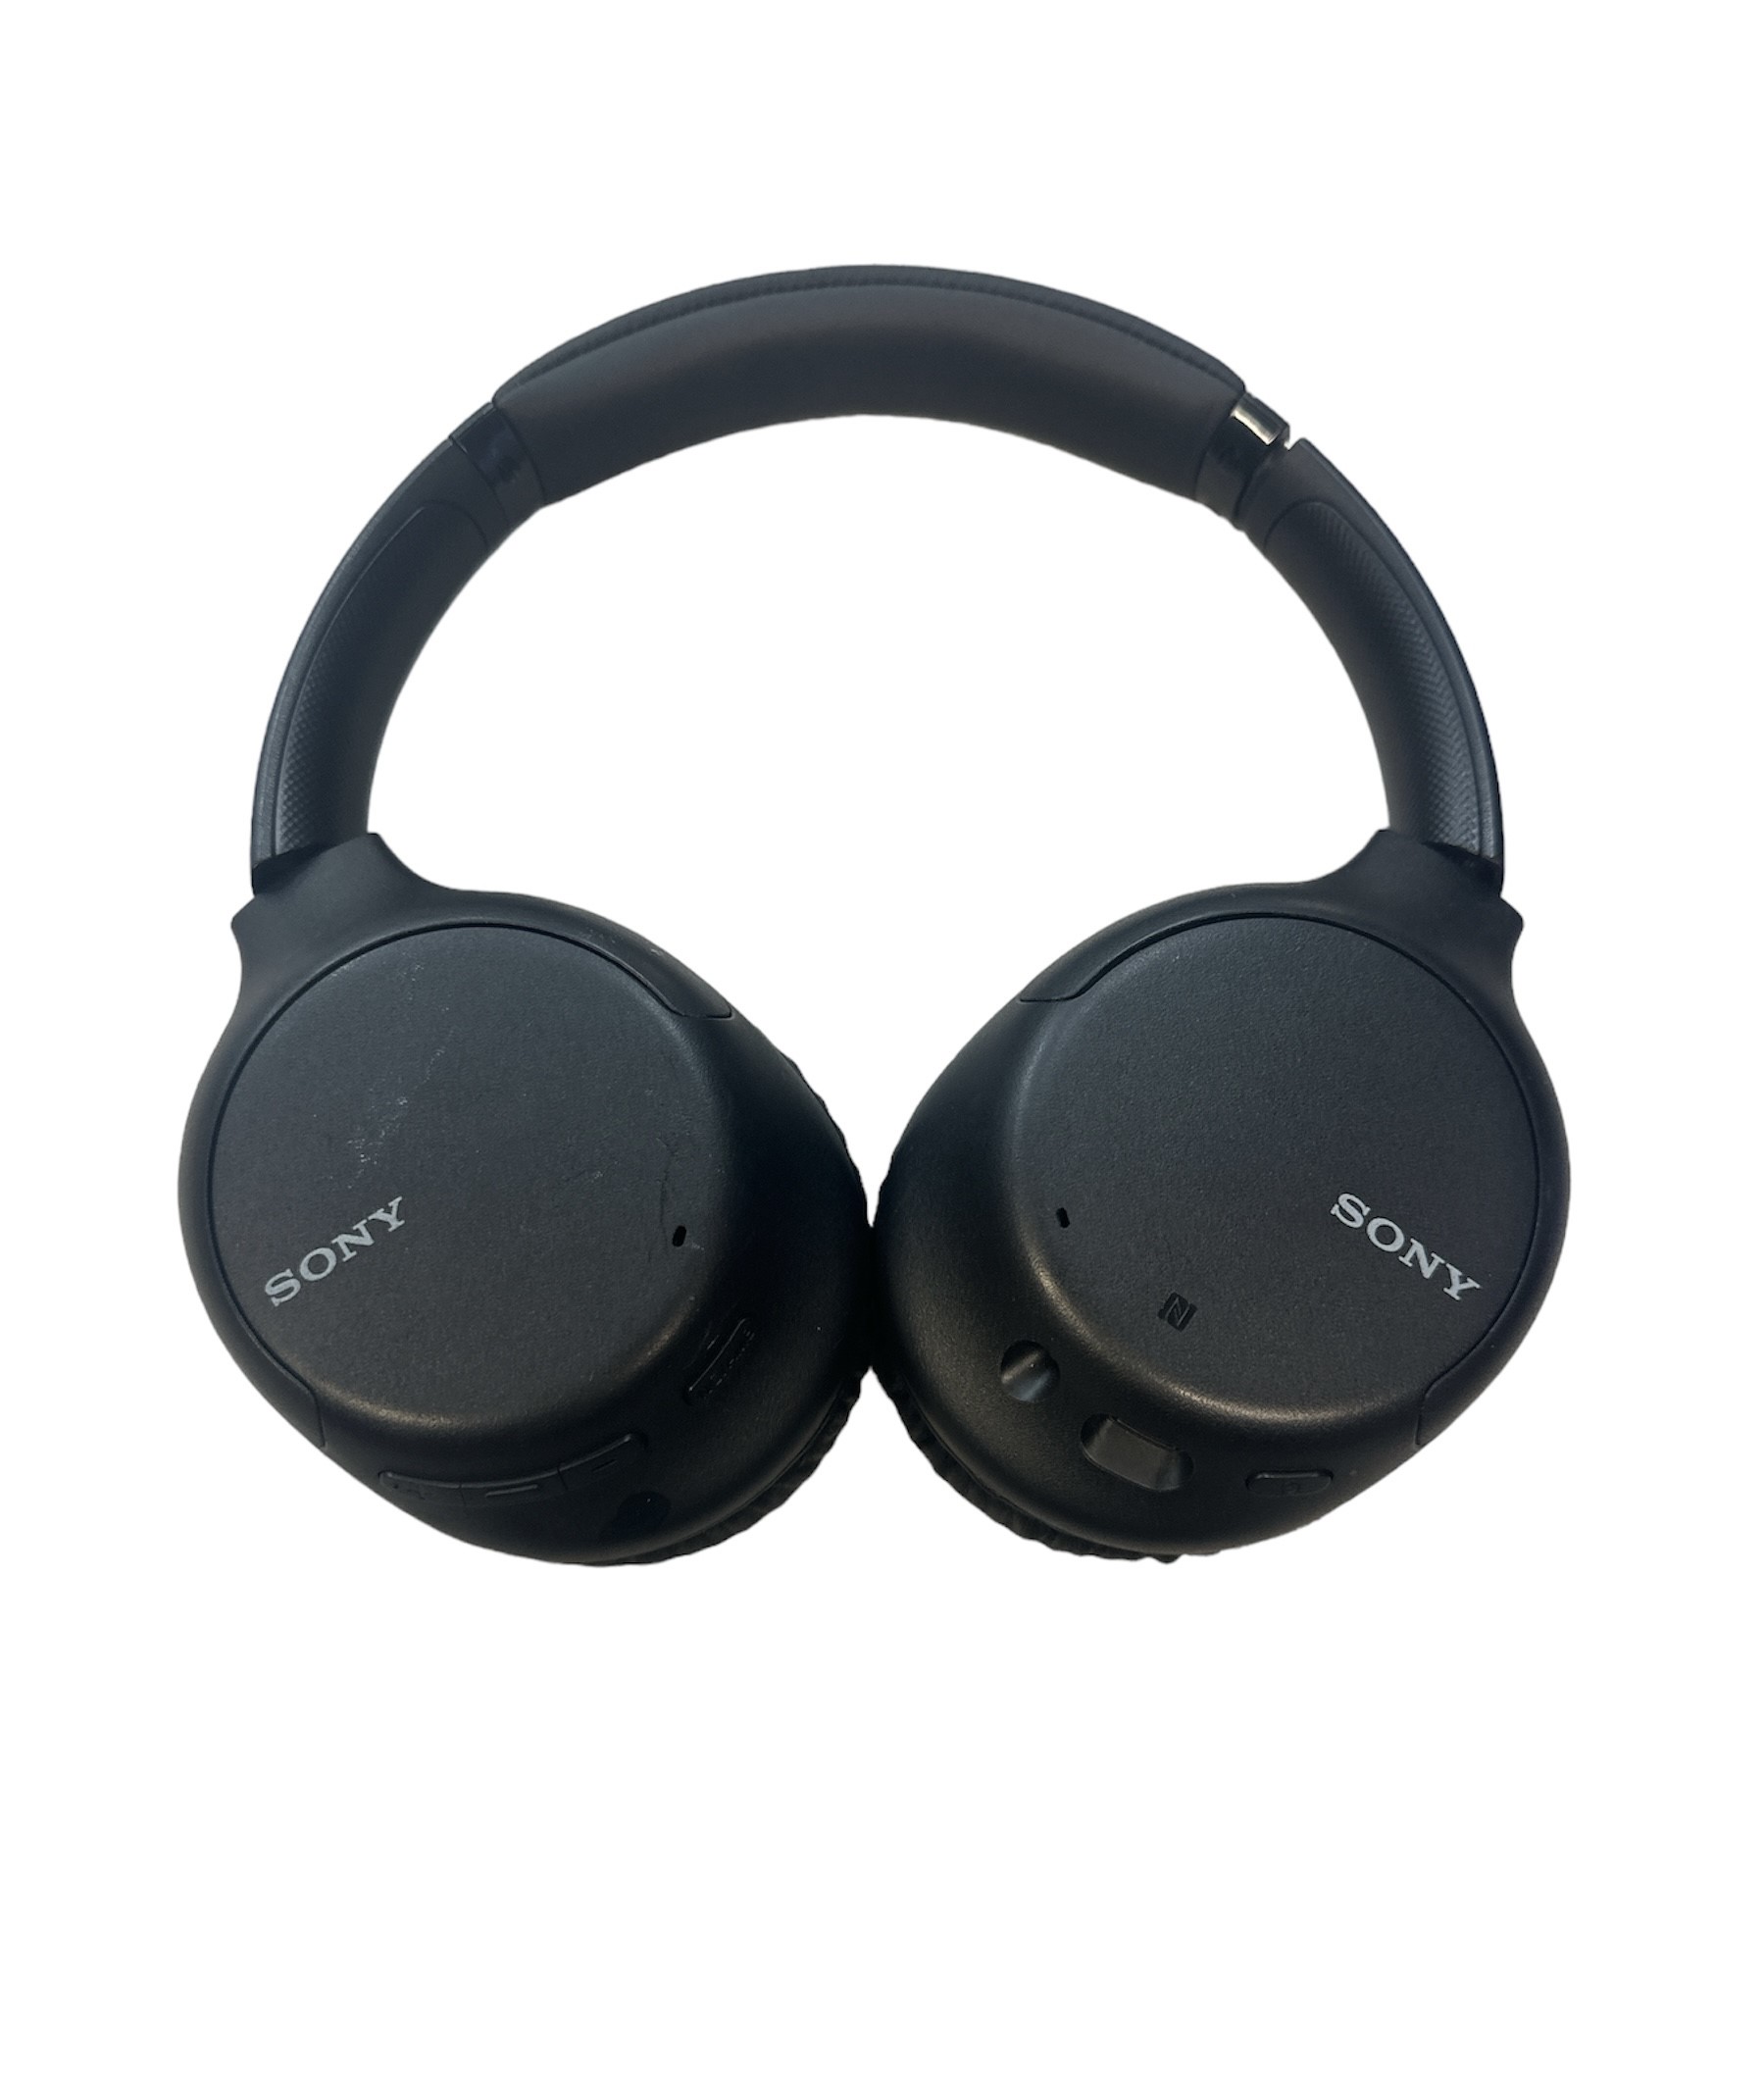 Sony WH-CH710N Noise Cancelling Wireless Headphones - Black